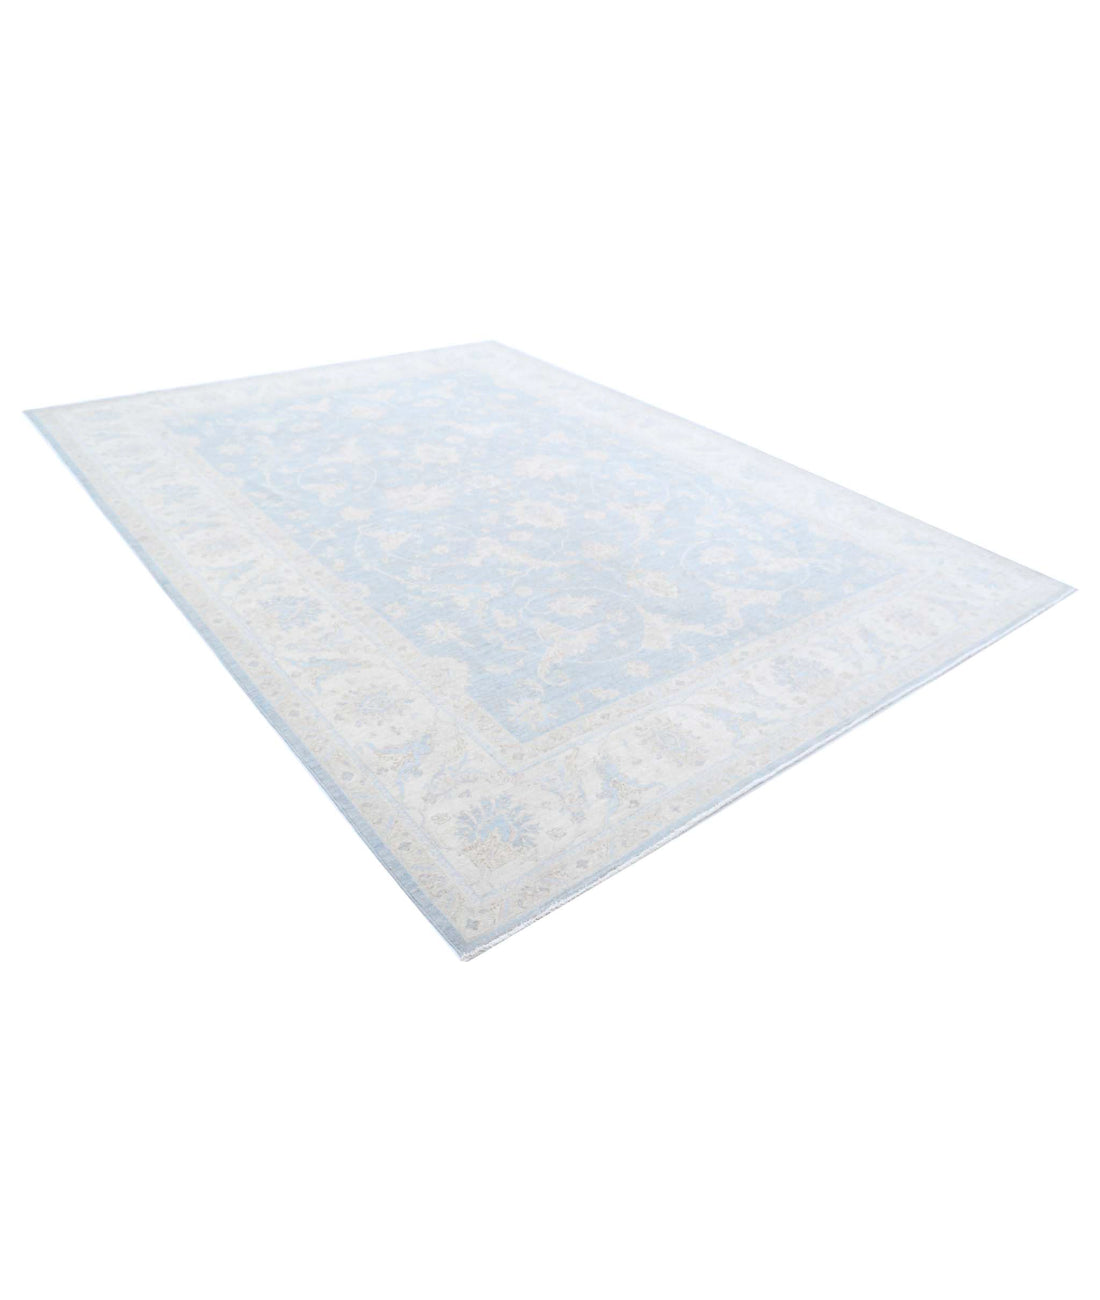 Serenity 8'11'' X 11'8'' Hand-Knotted Wool Rug 8'11'' x 11'8'' (268 X 350) / Grey / Ivory